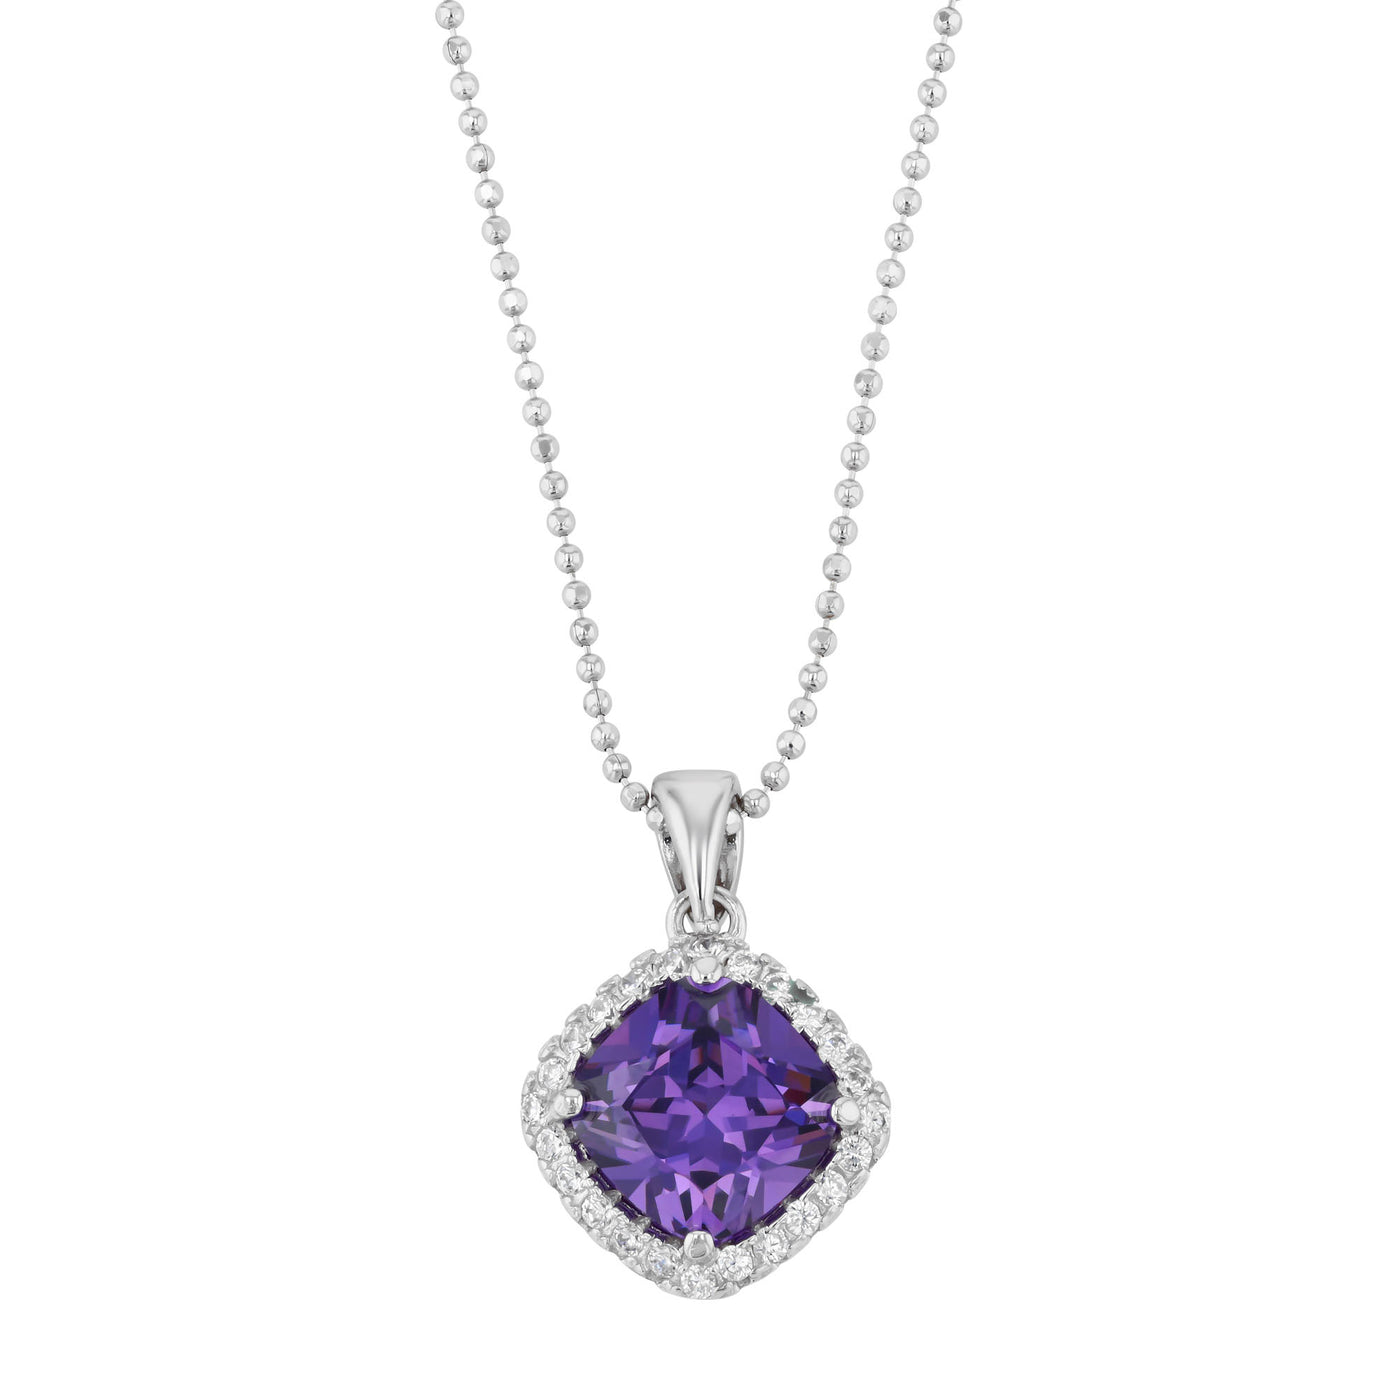 Rebecca Sloane Silver Cushion Pendant With Faceted Amethyst CZ